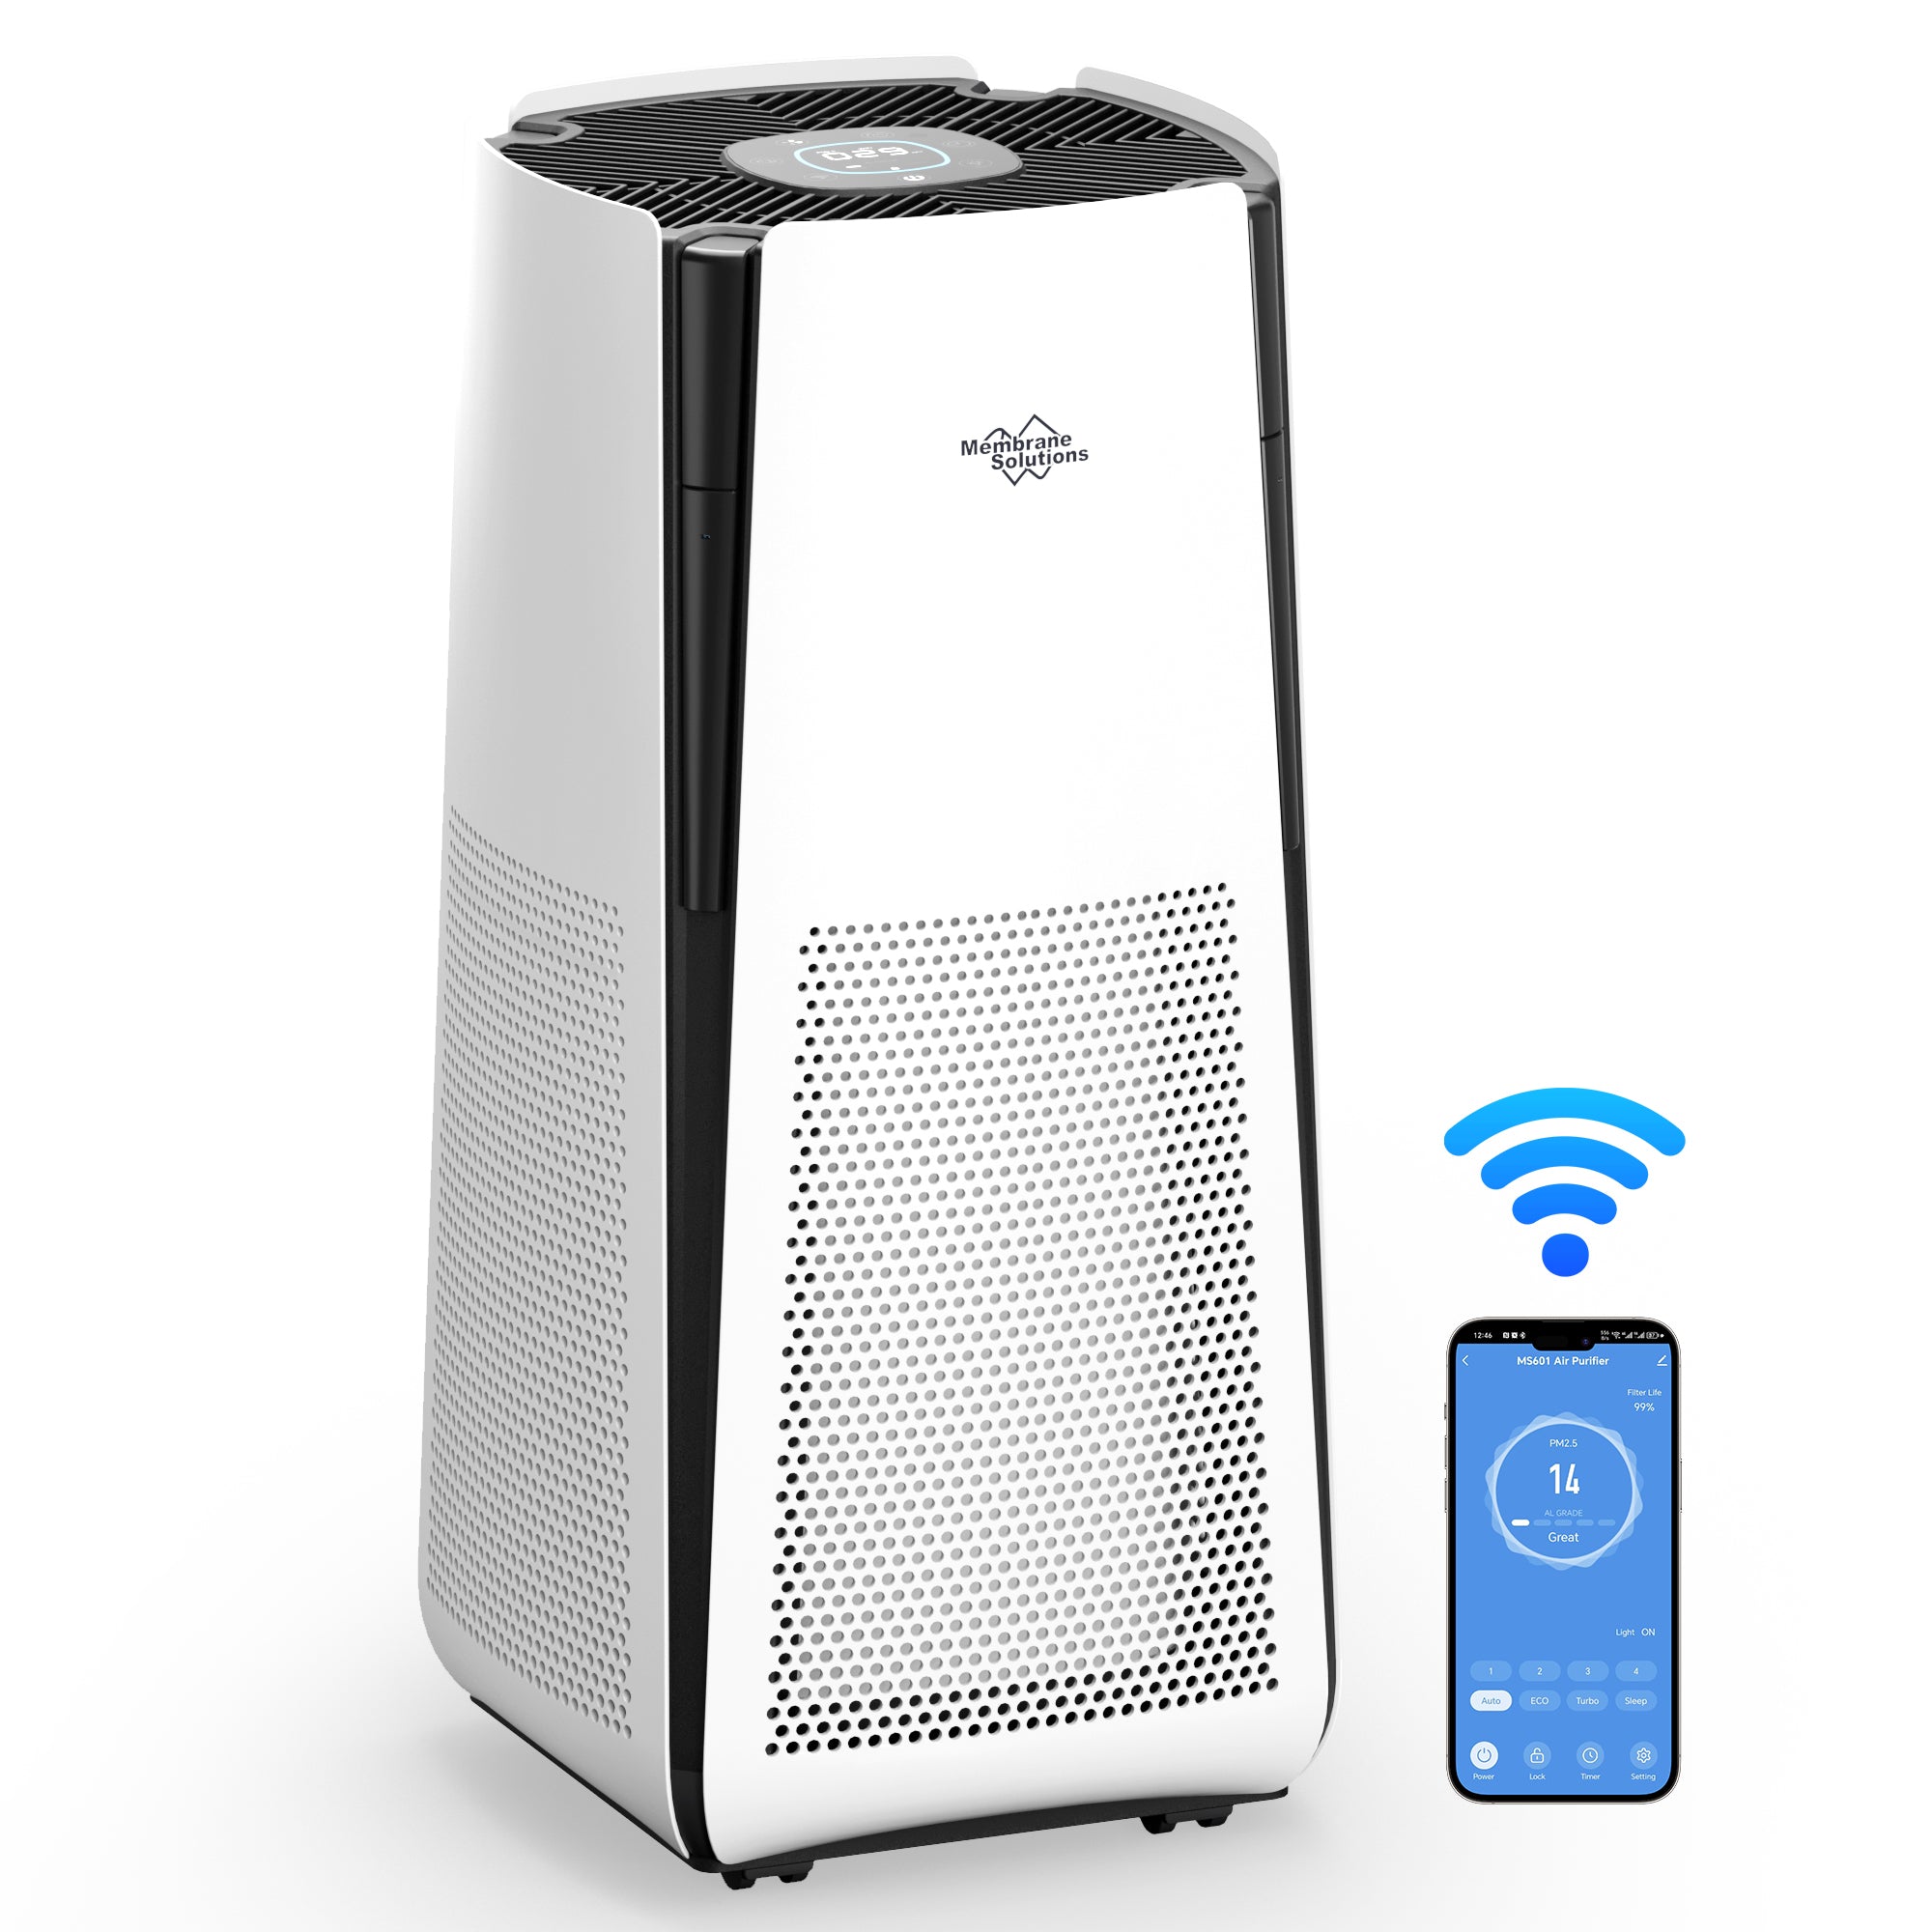 MS601 Extra Large Room Air Purifier Help With Allergies